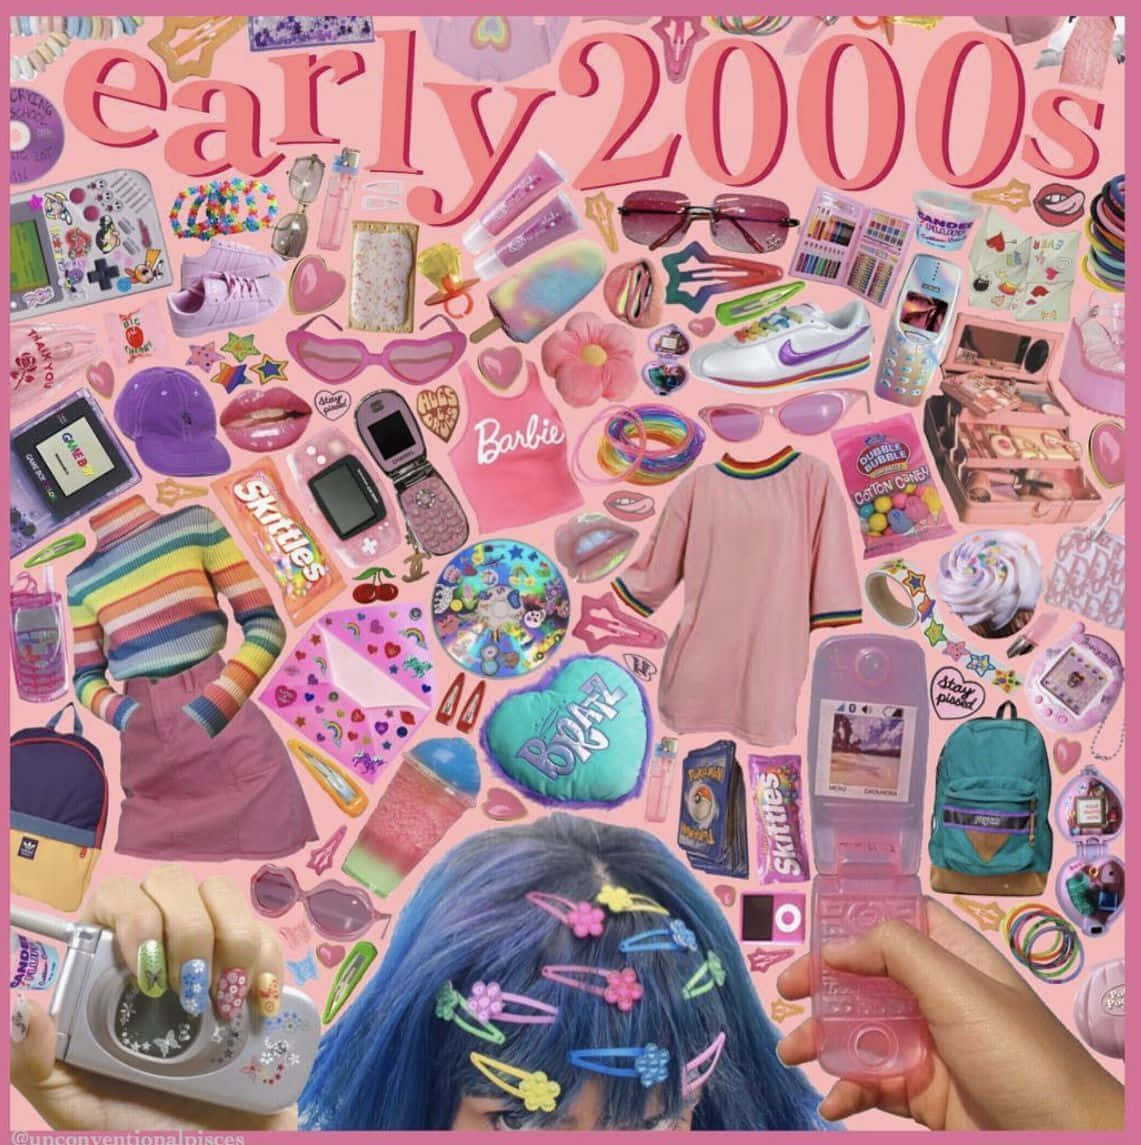 Early 2000s - A Collage Of Pink Hair, Accessories And Other Items